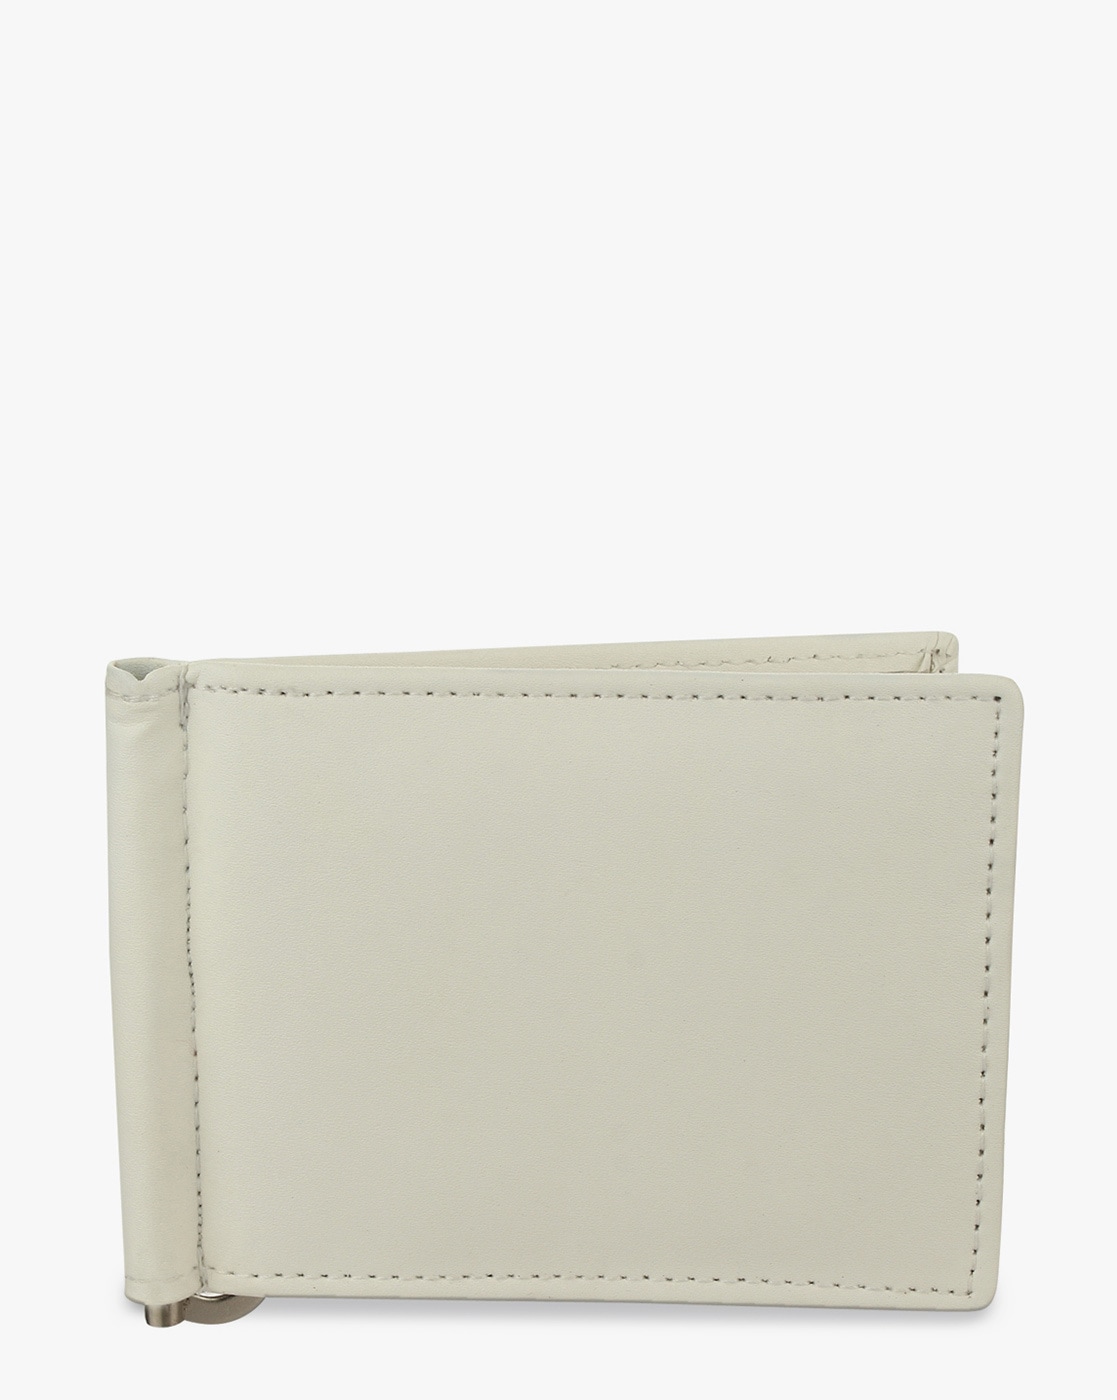 White leather wallet